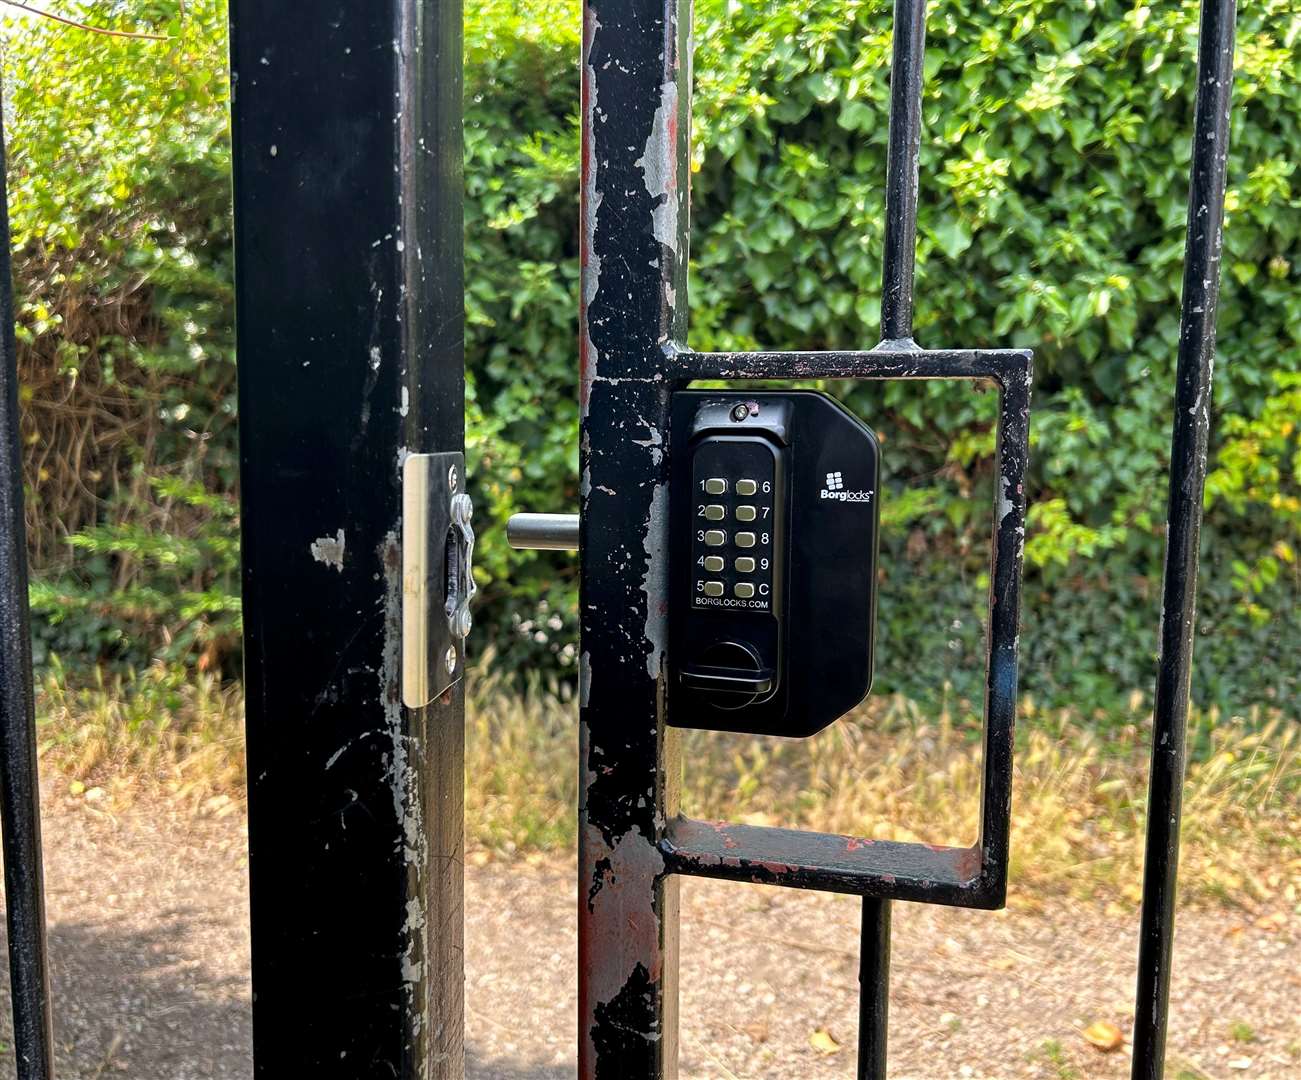 The lock installed on the gate in Lakeside Avenue, Faversham